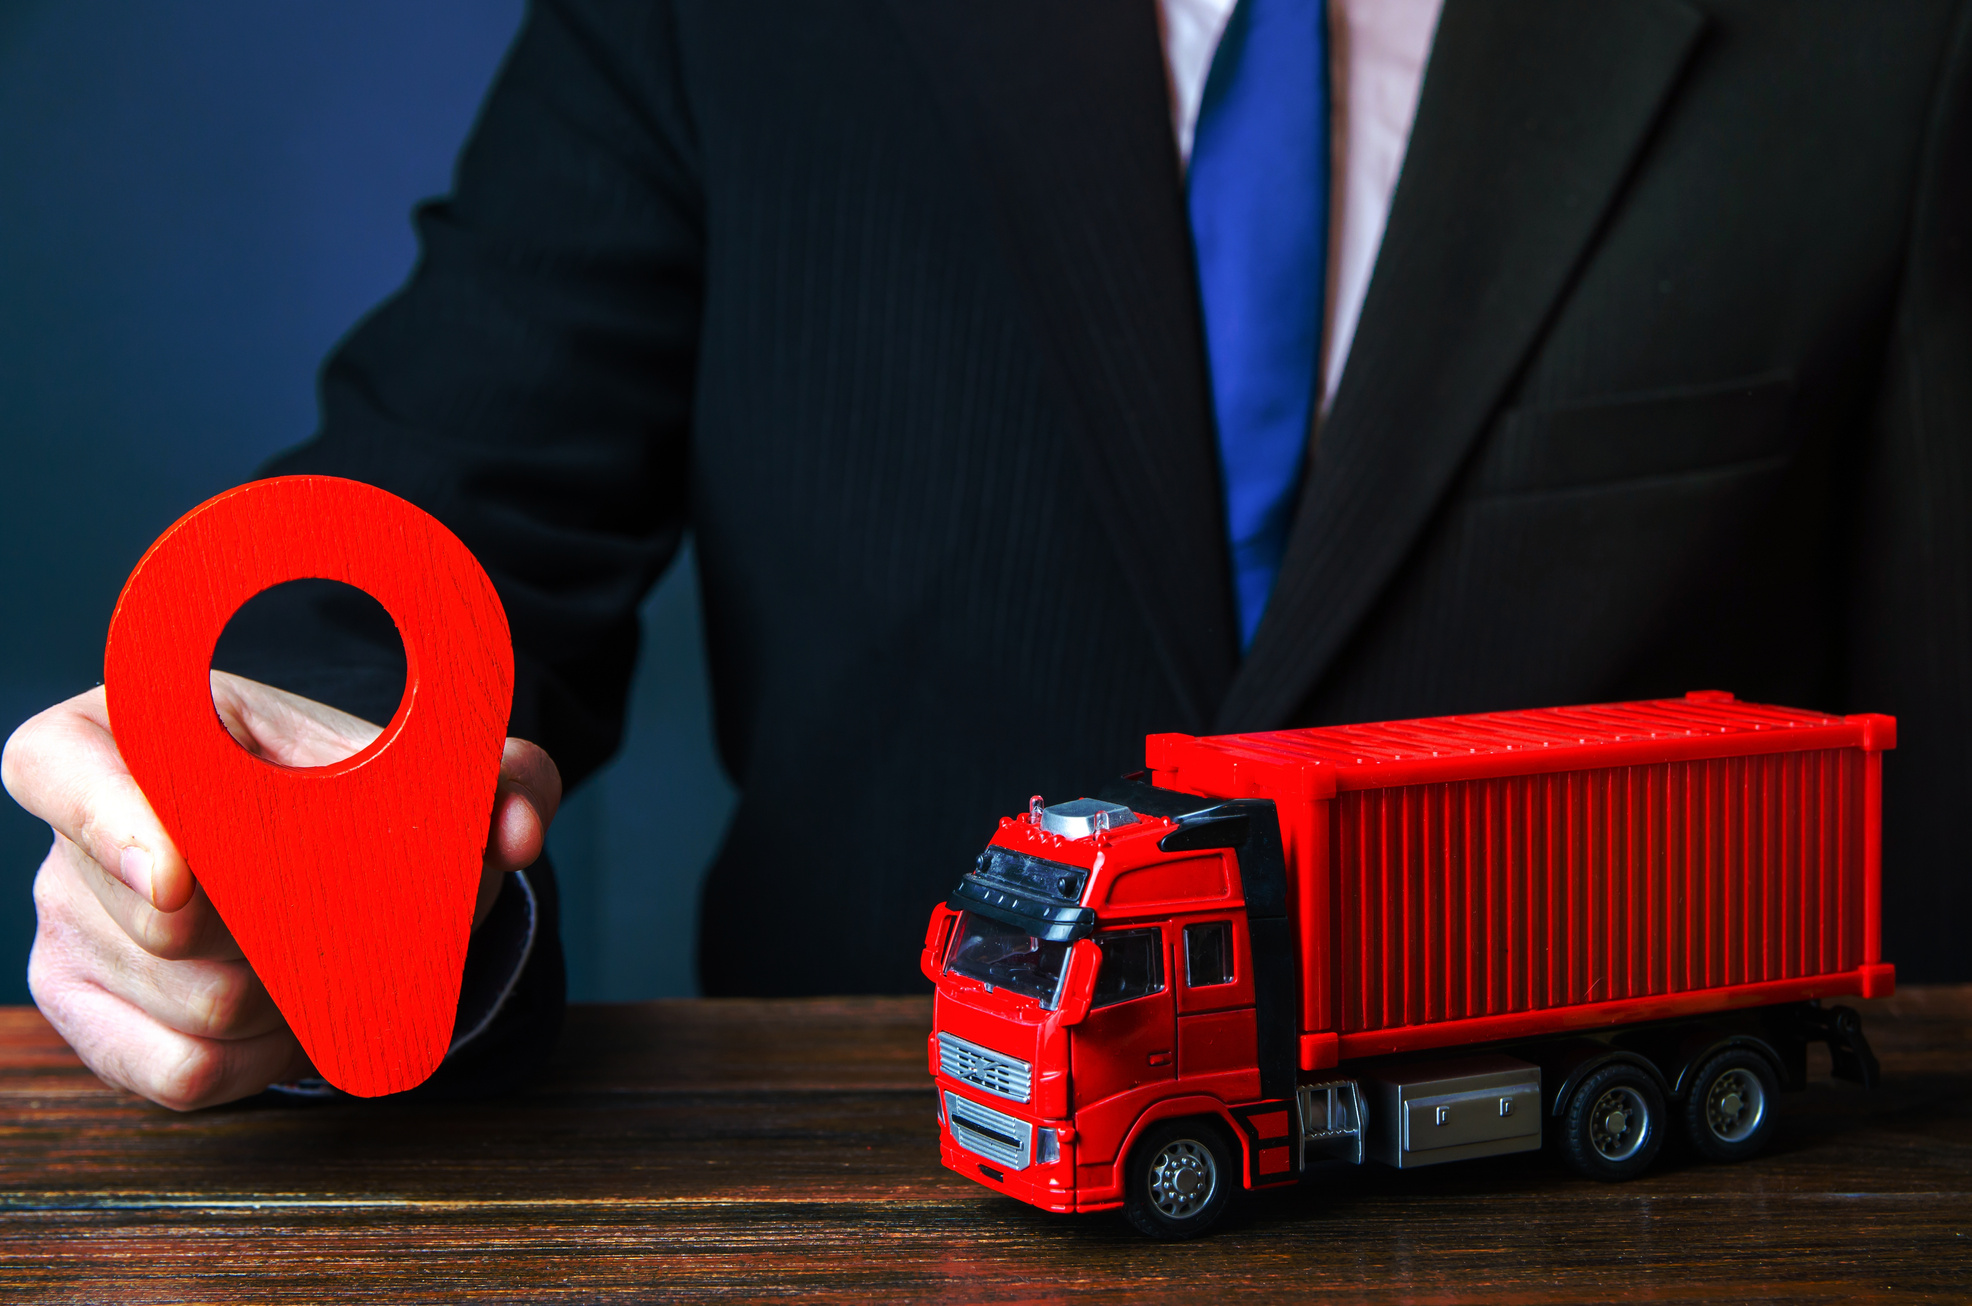 Truck and businessman with red location pin. Transport service infrastructure, business service. Logistics. Transportation company. Package tracking. Express delivery, shipping